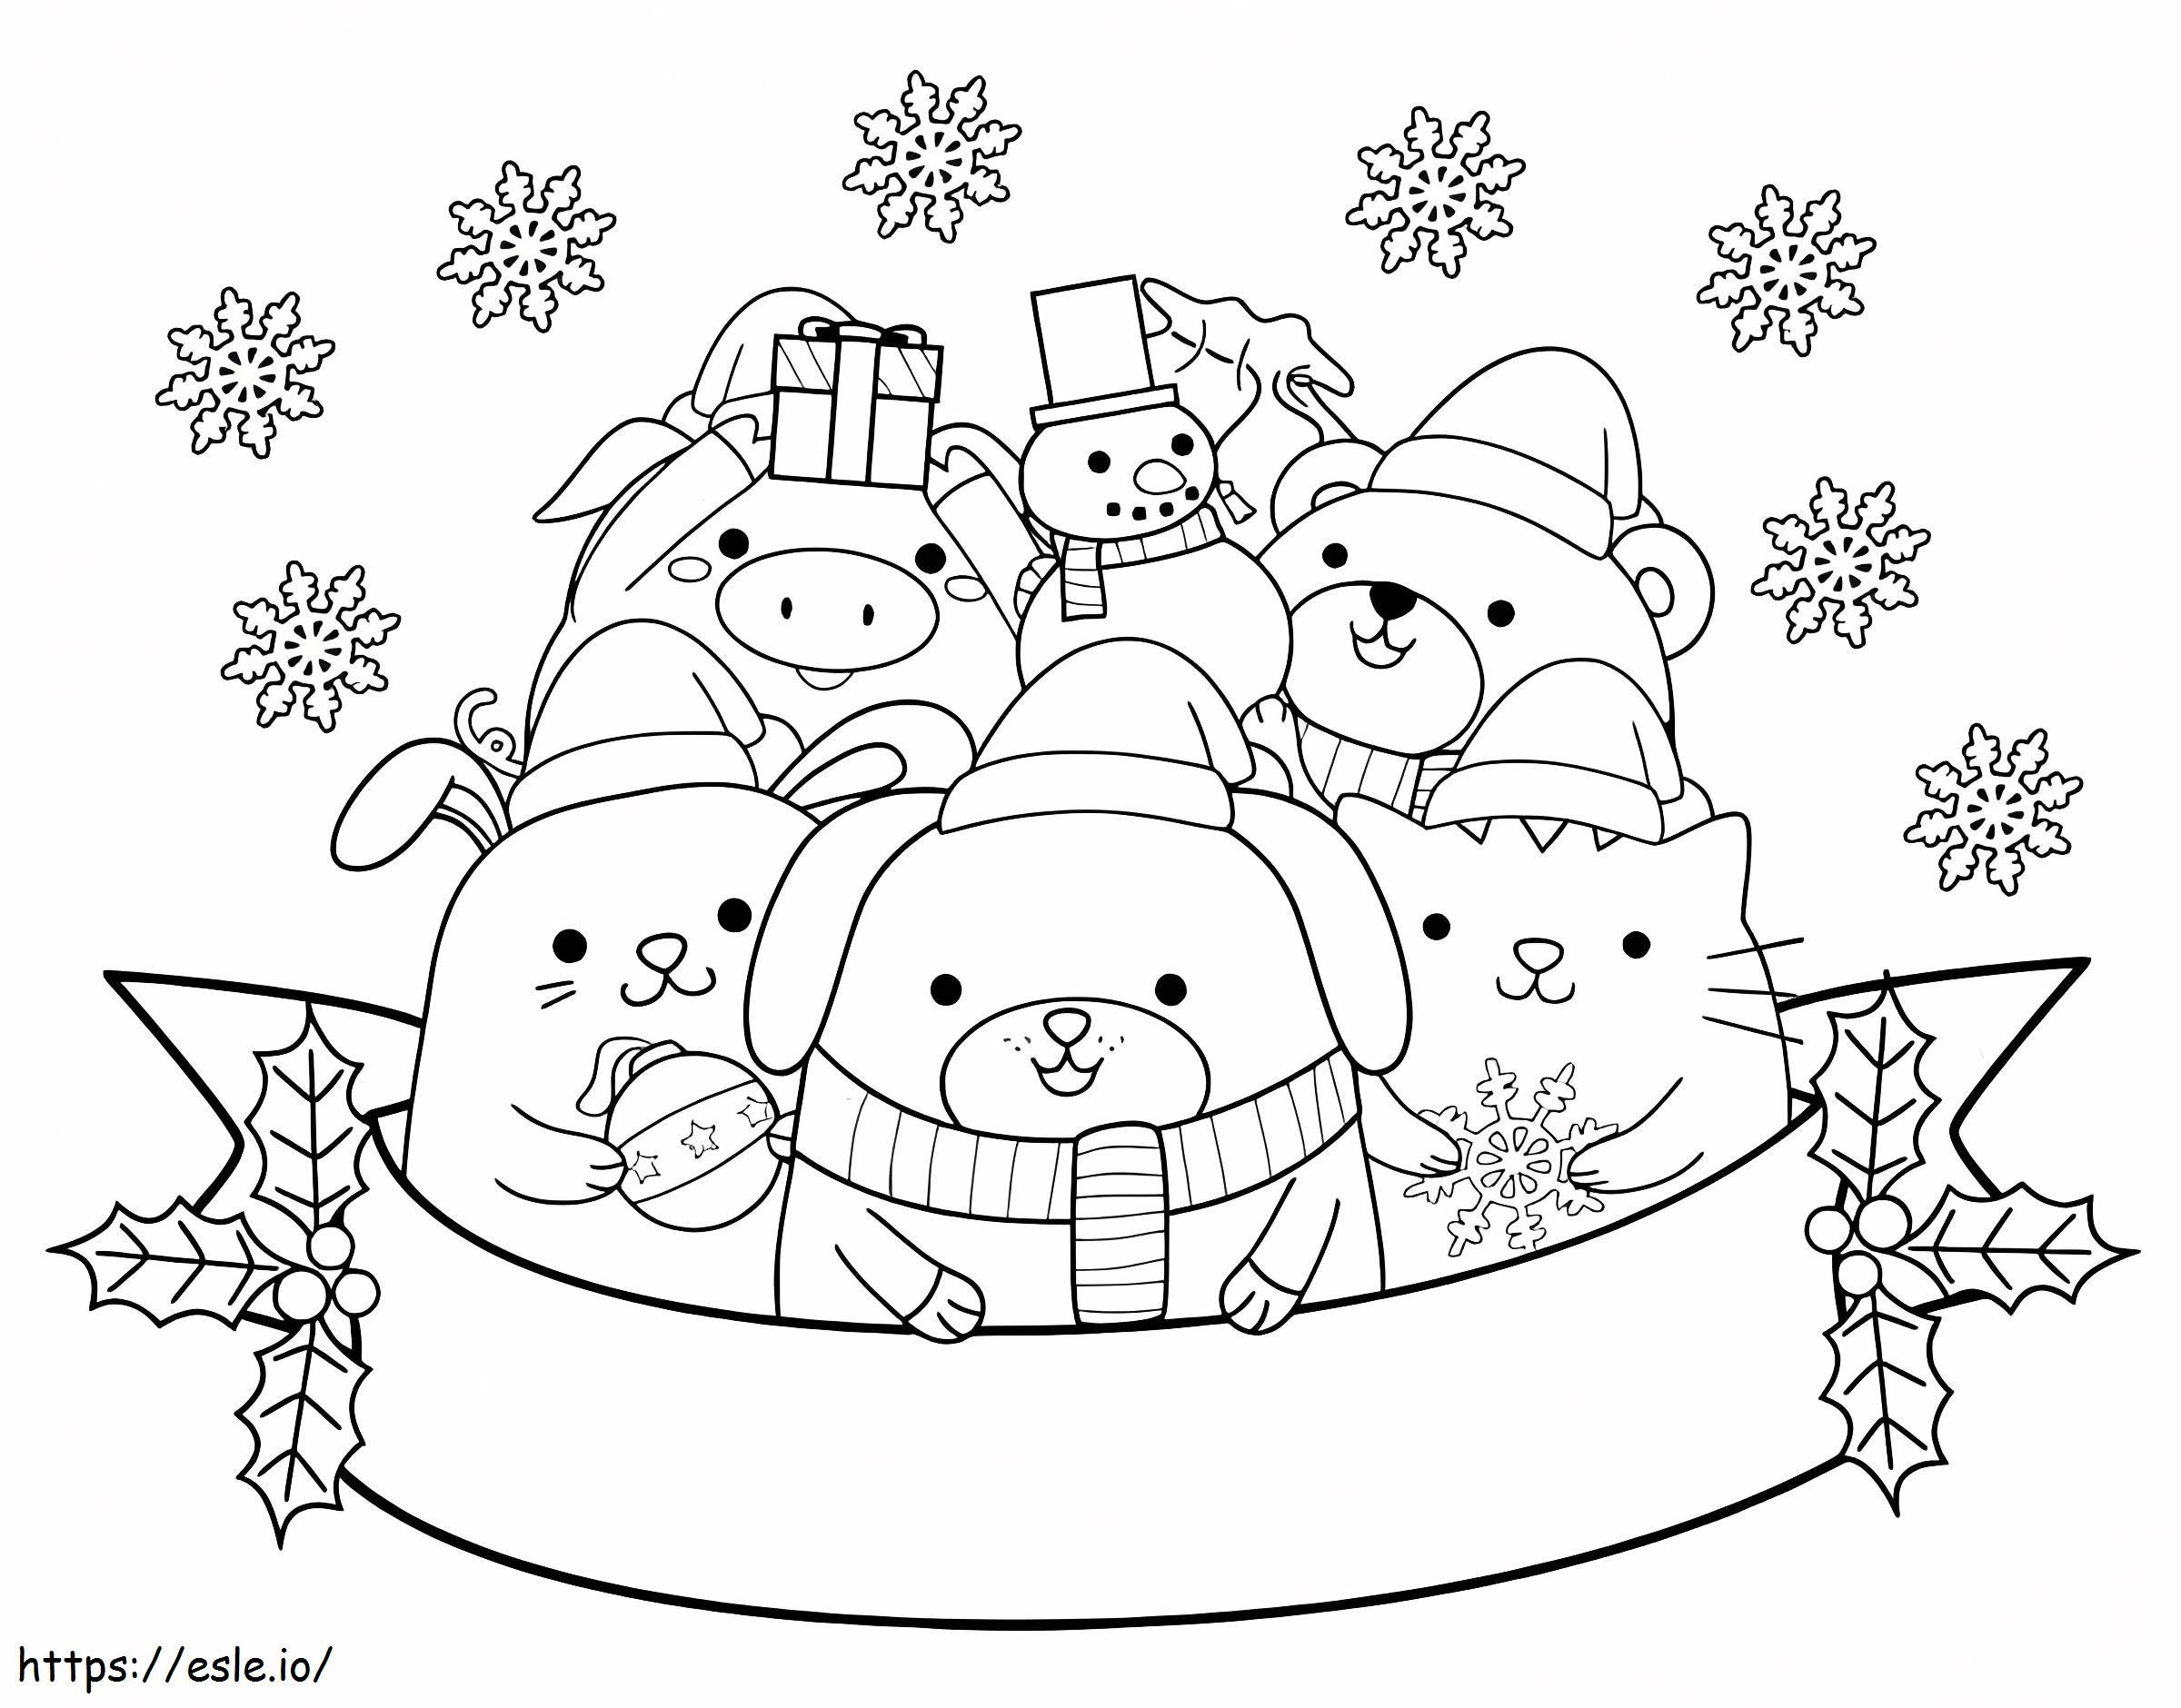 Cute Christmas Animals coloring page